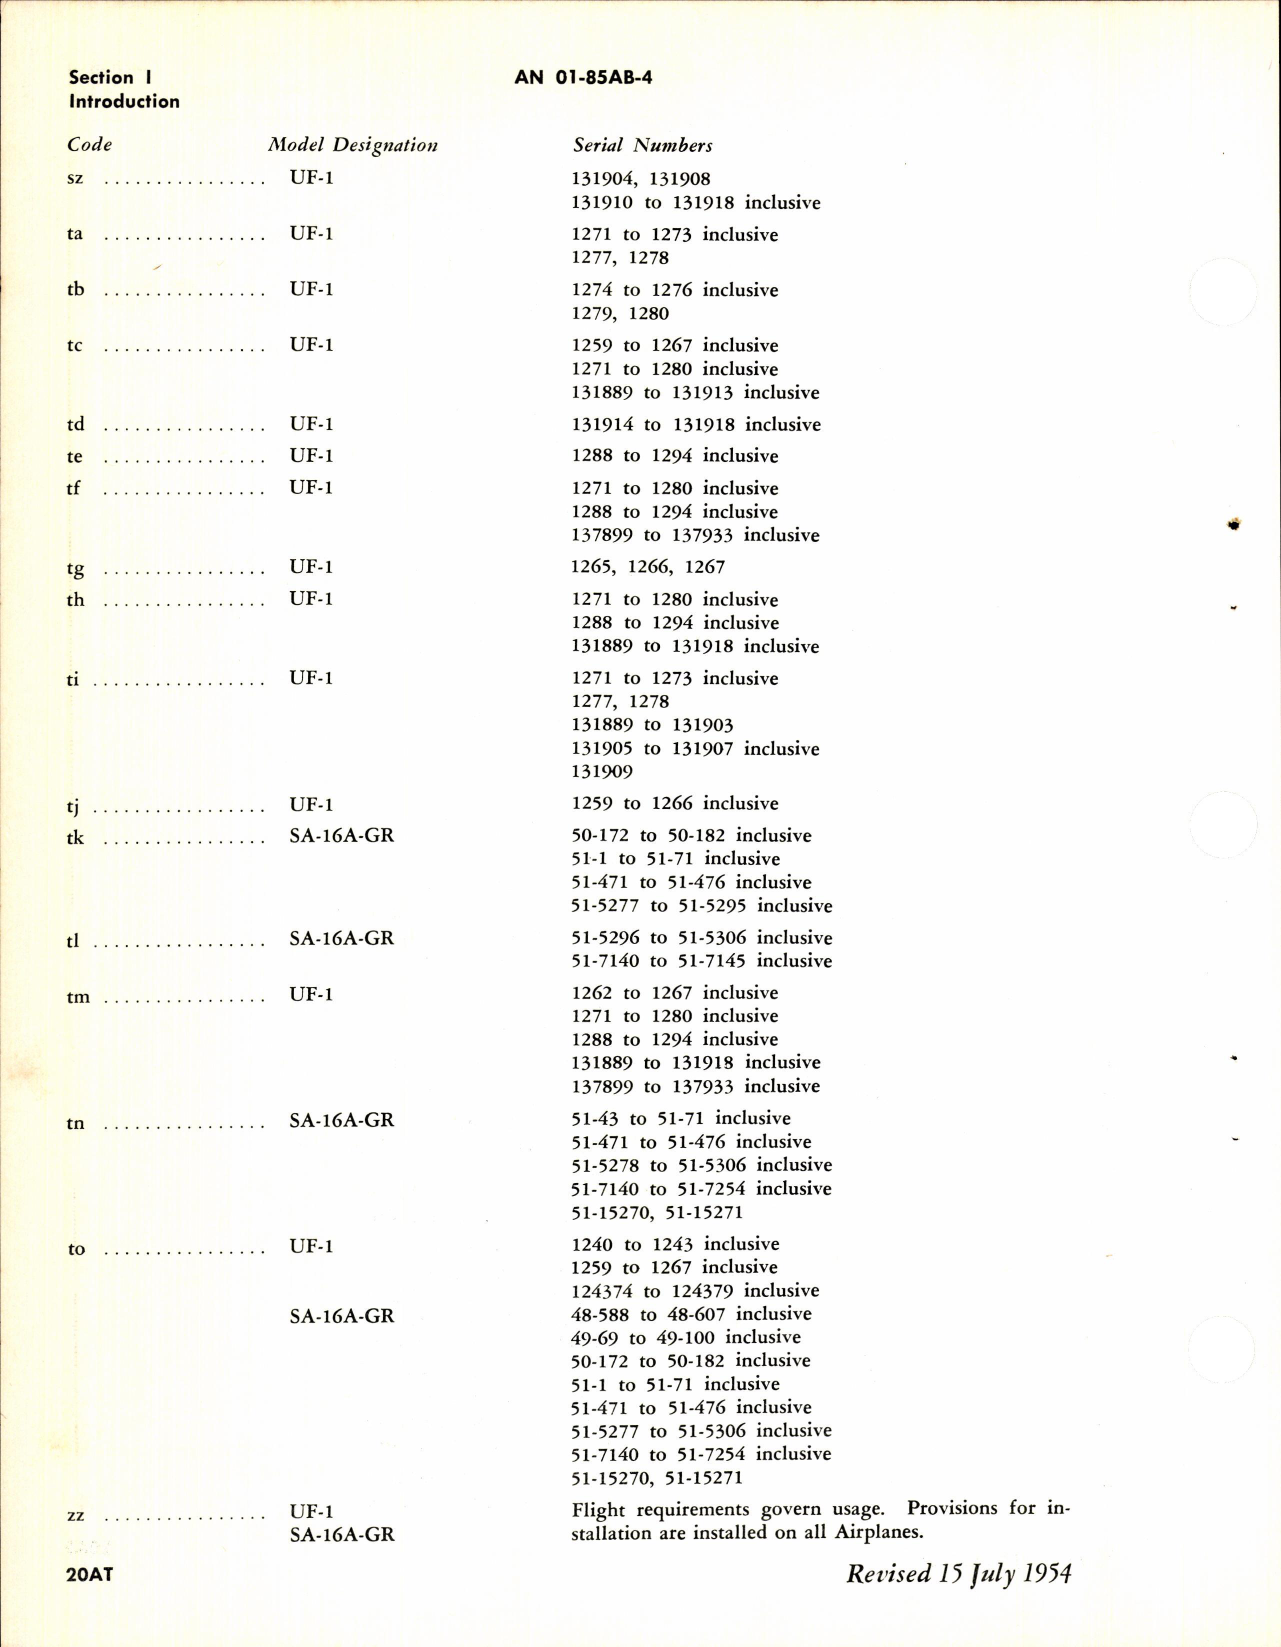 Sample page 46 from AirCorps Library document: Parts Catalog for SA-16A-GR, UF-1, and UF-1T Aircraft